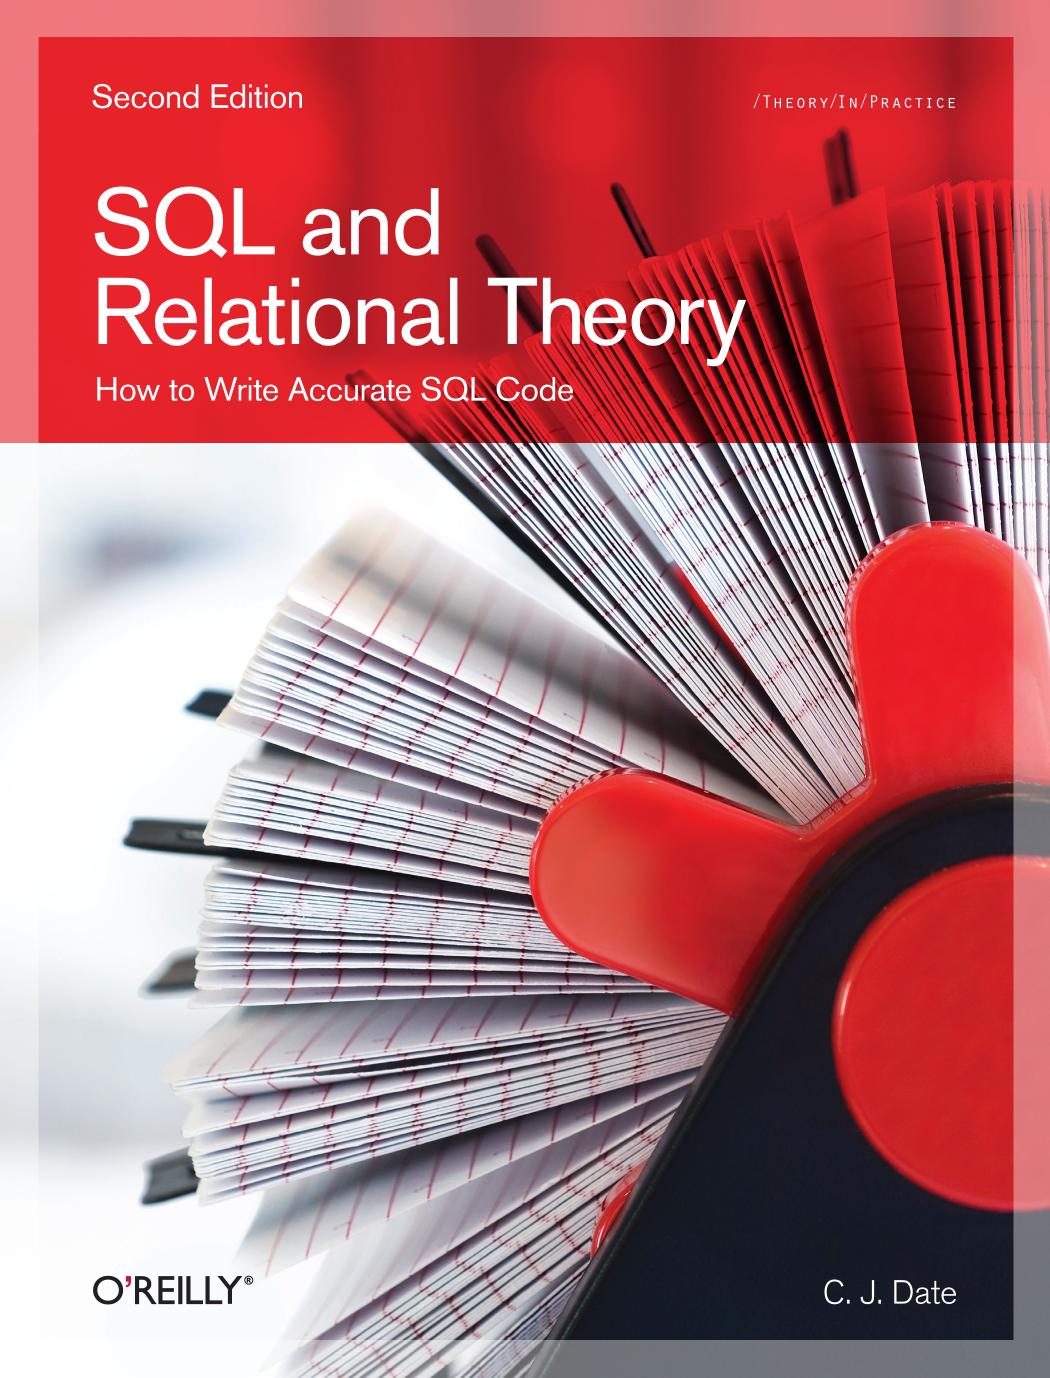 SQL and Relational Theory by C. J. Date